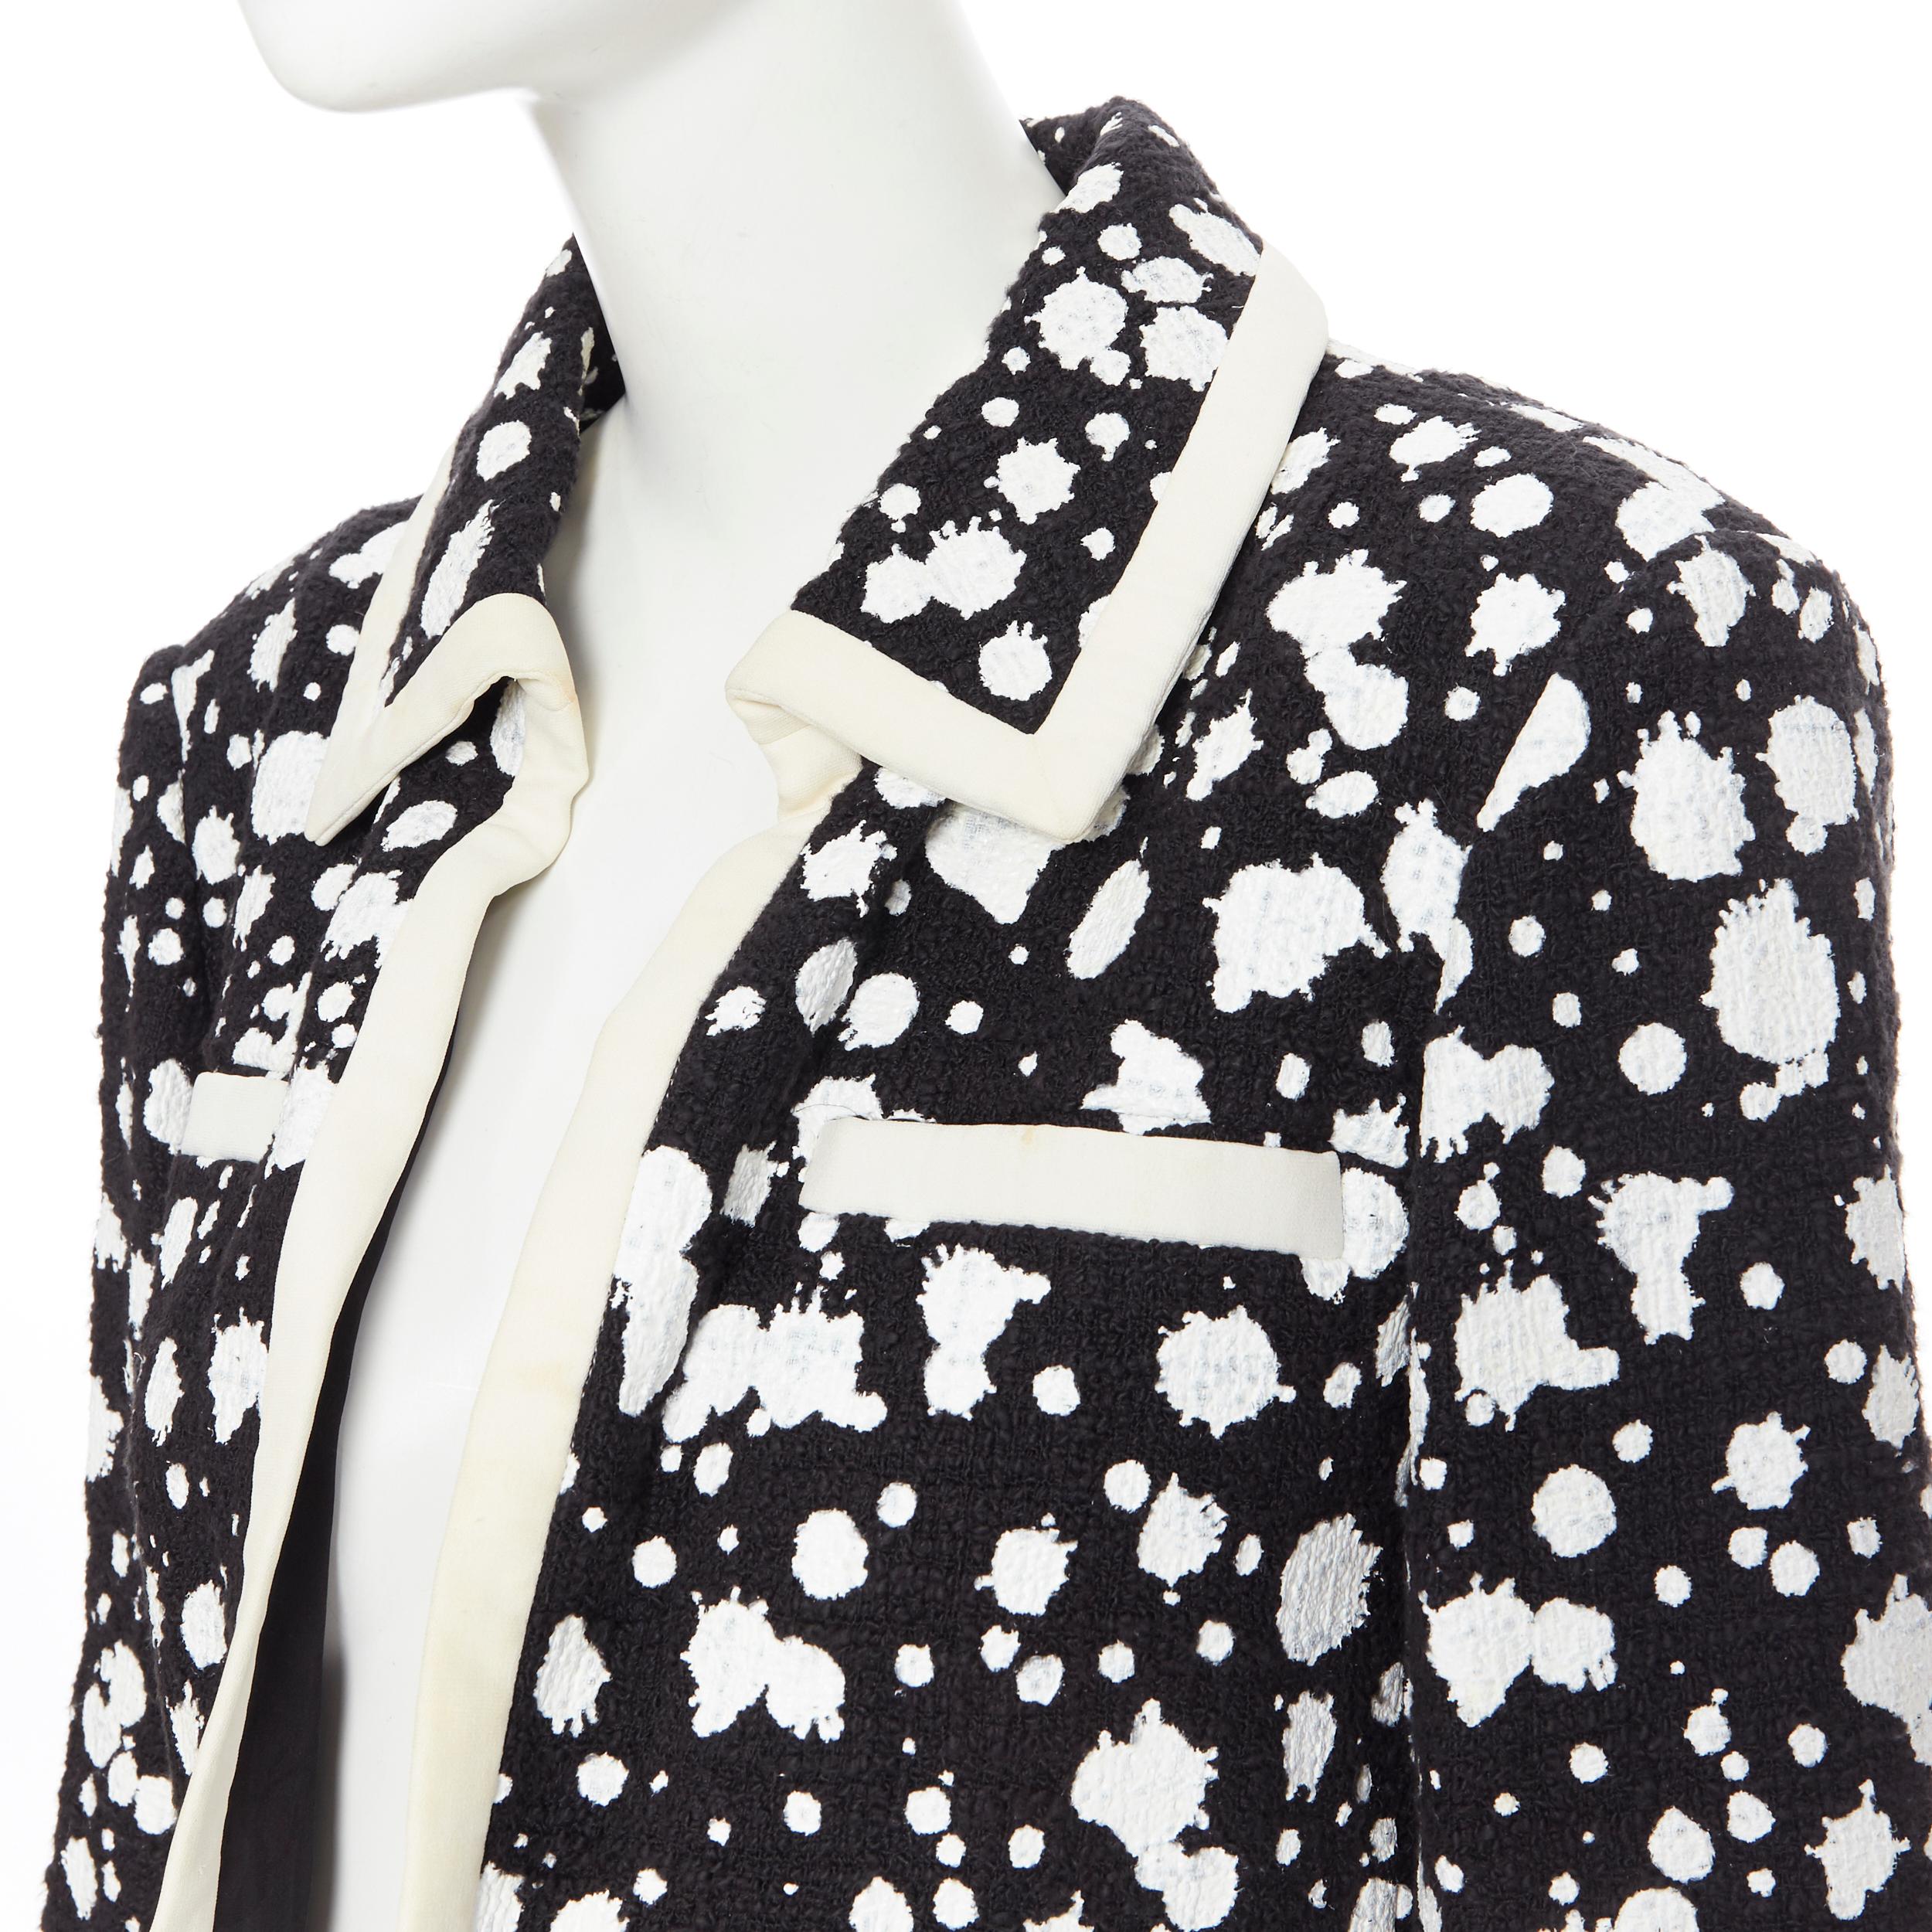 CHANEL white paint splatter black tweed cotton trimmed 4-pocket crop jacket FR40
Brand: Chanel
Designer: Karl Lagerfeld
Model Name / Style: Tweed jacket
Material: Cotton, rayon
Color: Black, white
Pattern: Abstract; paint splatter
Extra Detail: Open